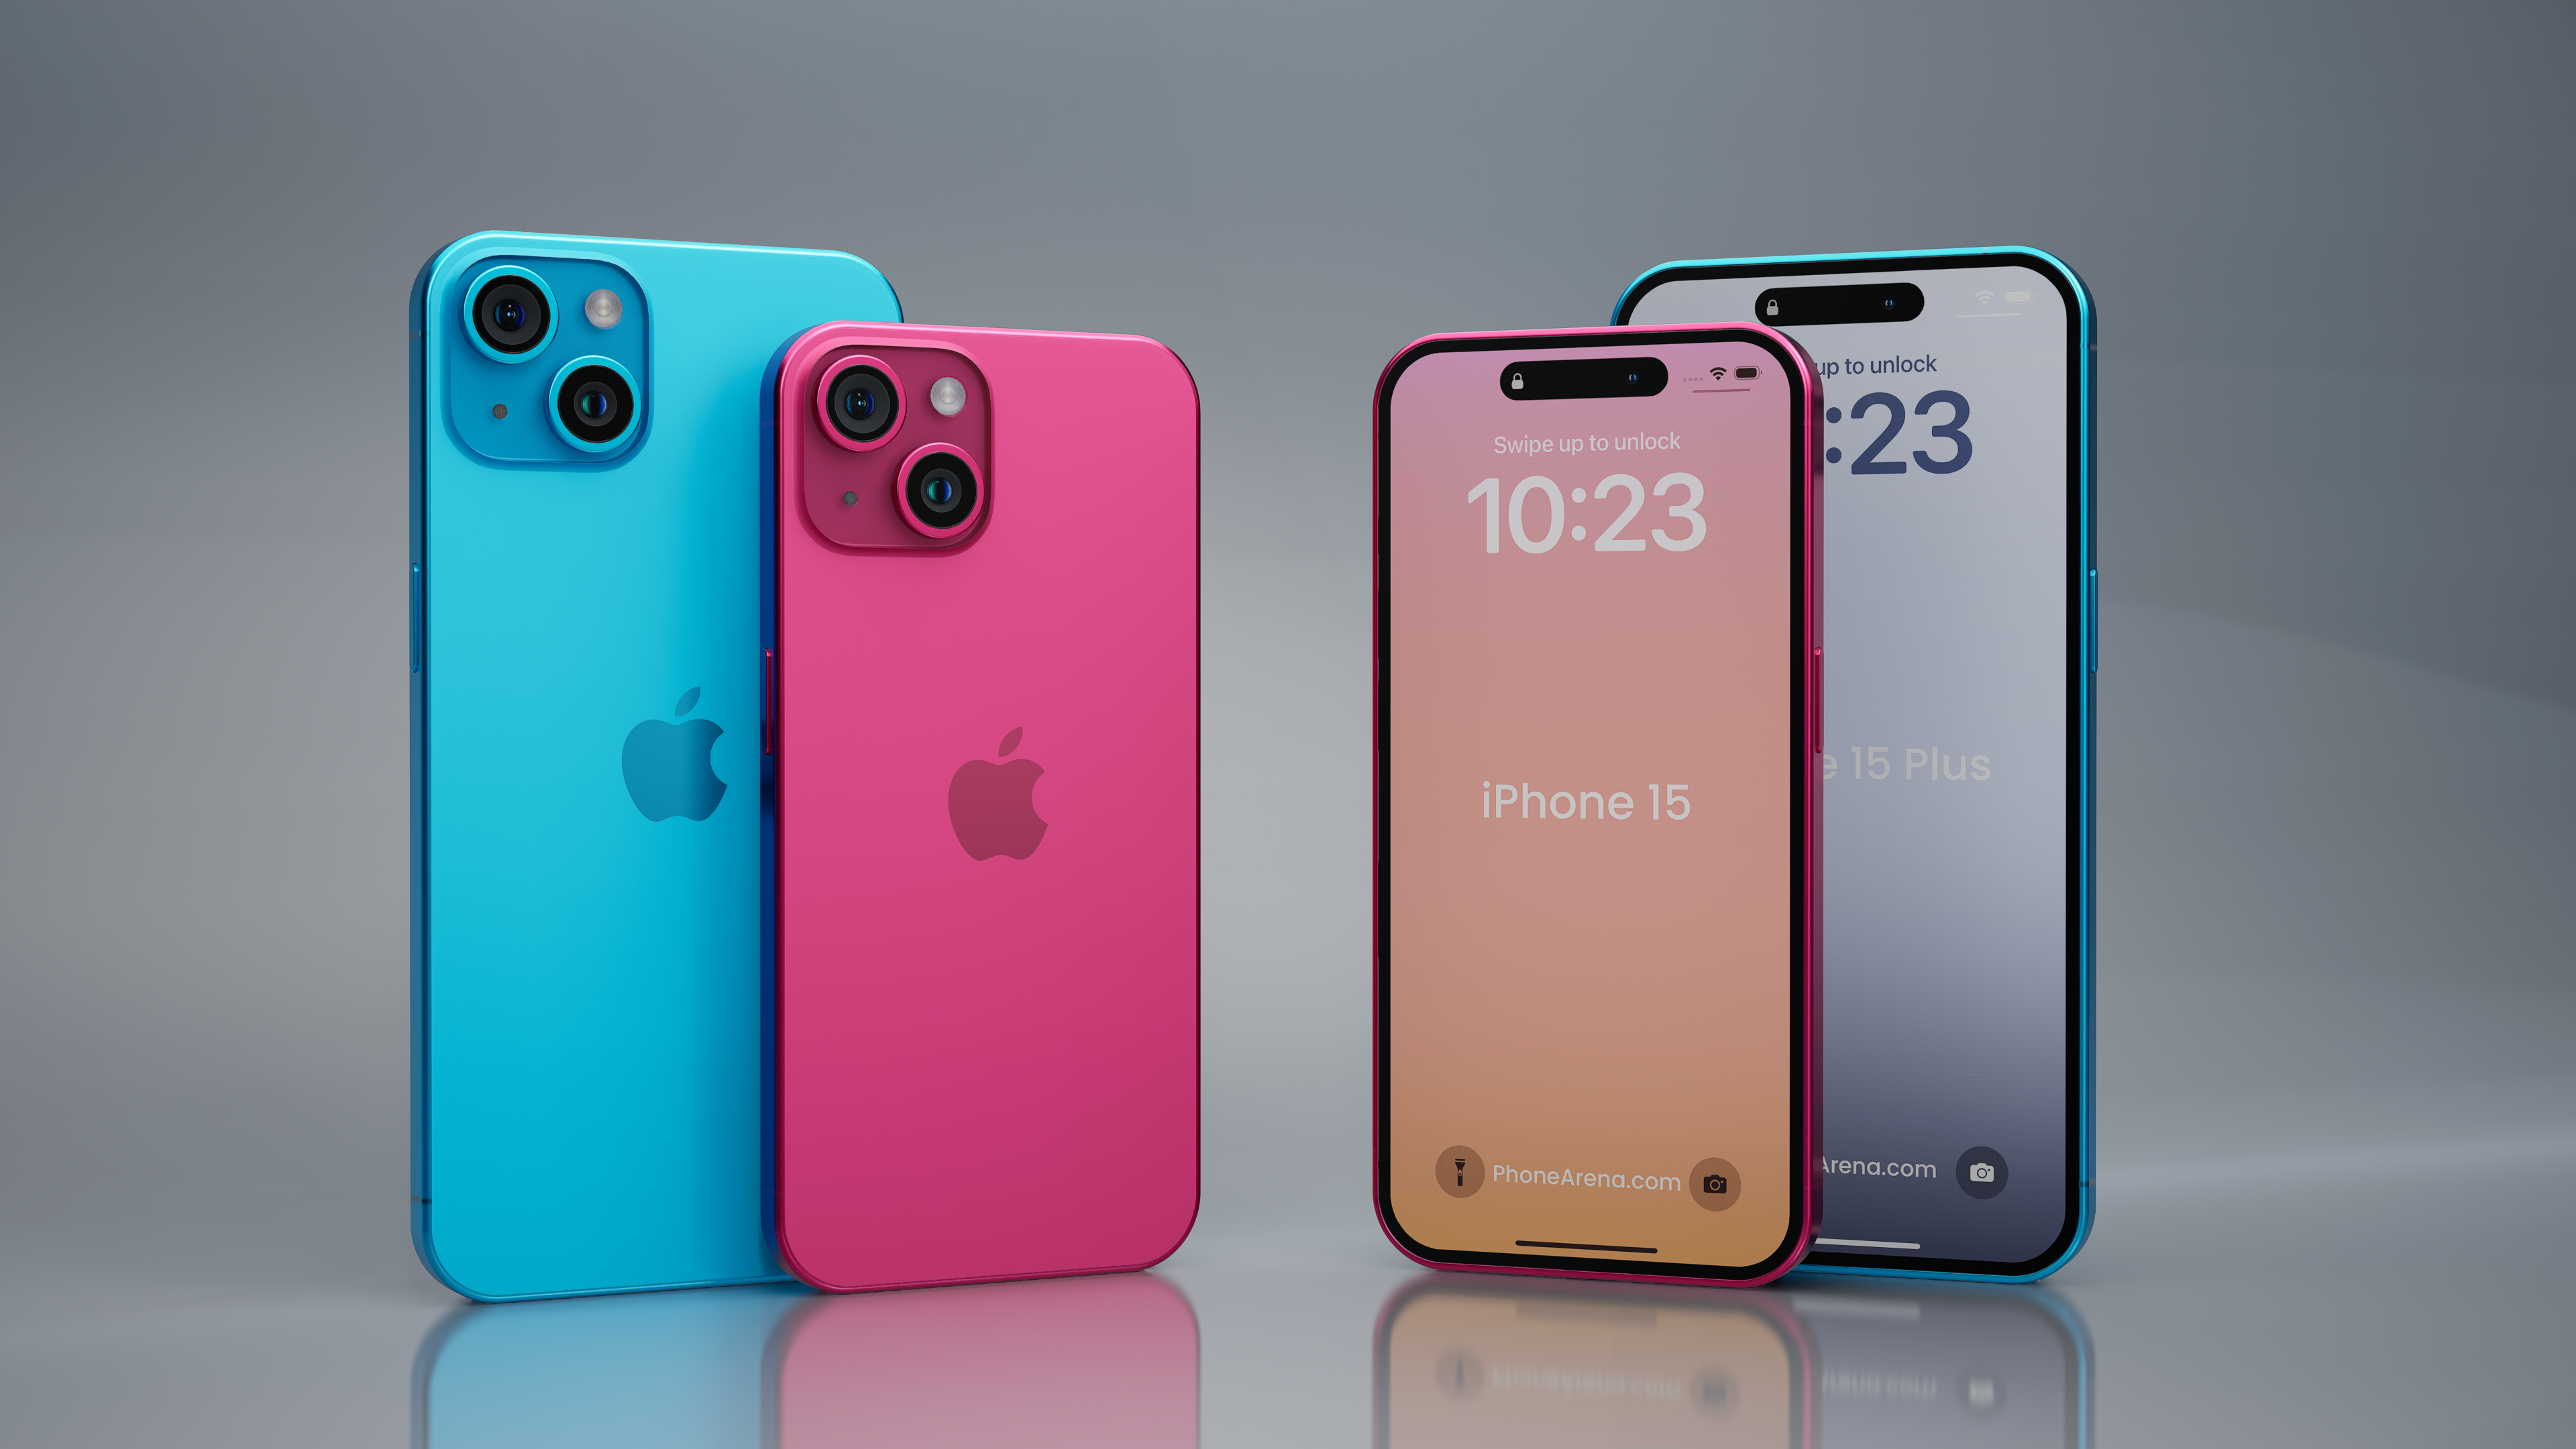 iPhone 15 and iPhone 15 Plus get the Dynamic Island. - Here are all the expected iPhone 15 design changes visualized